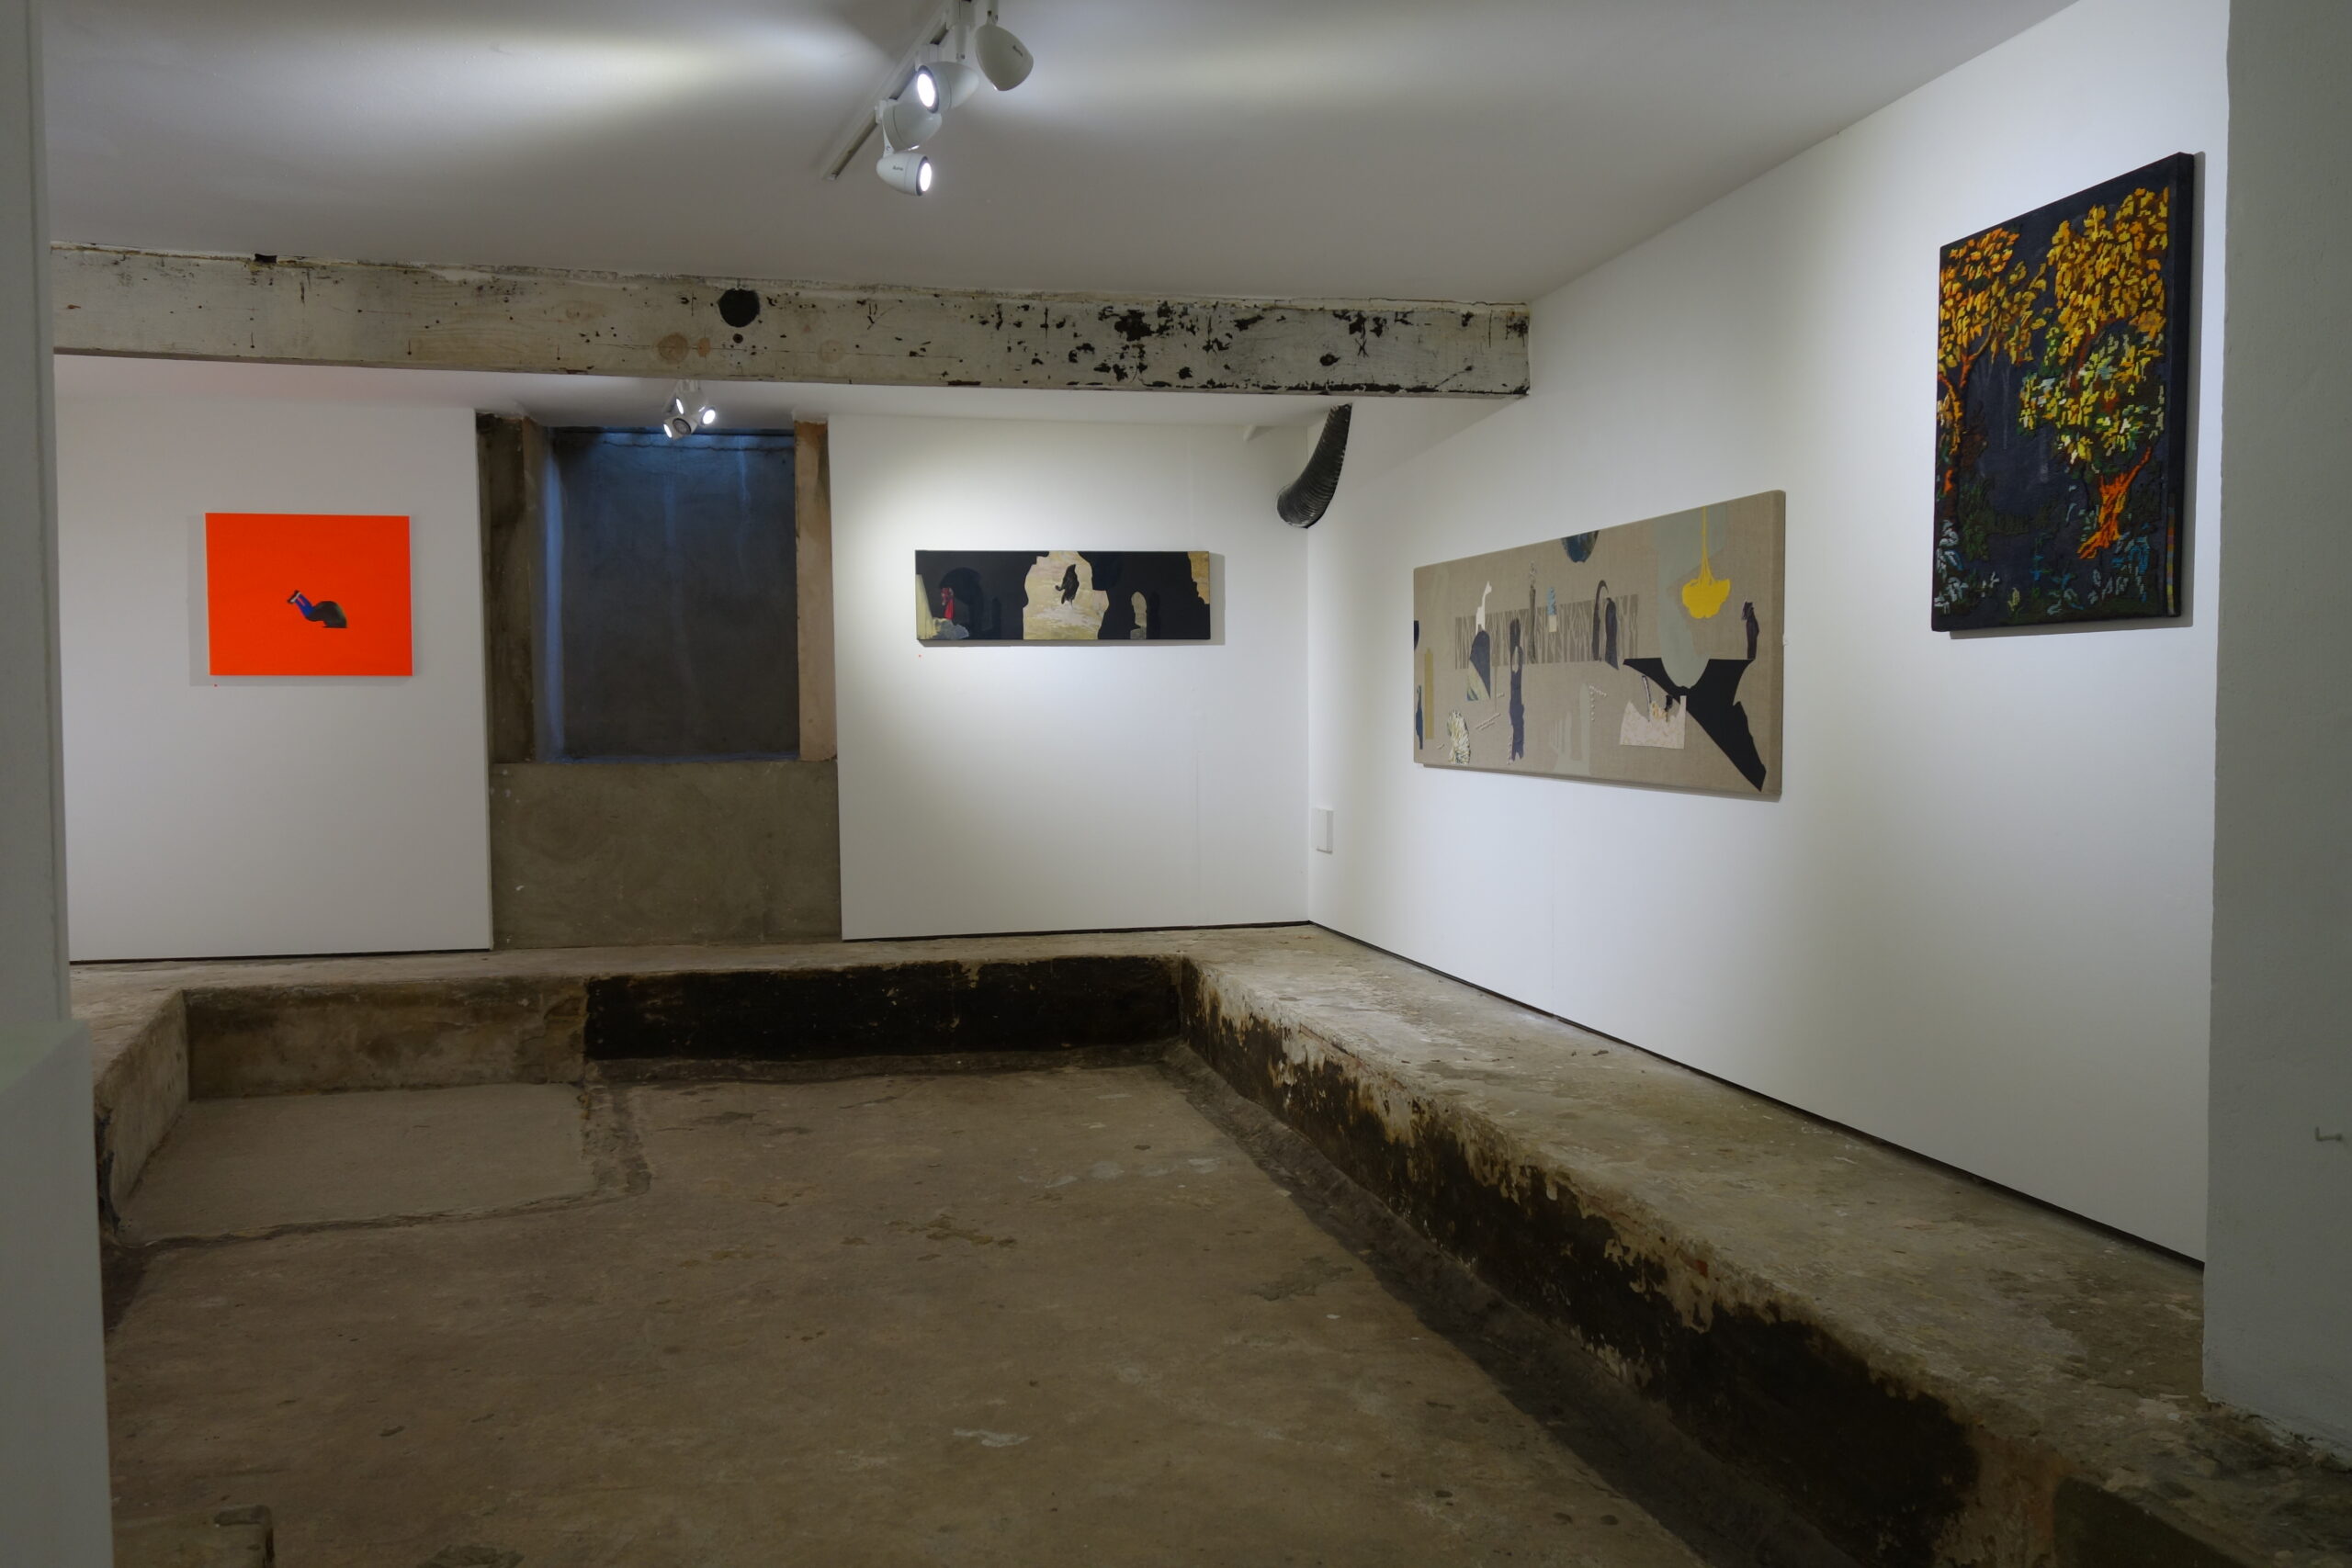 Quarry exhibition: works of art installed in the Brocket Gallery, London